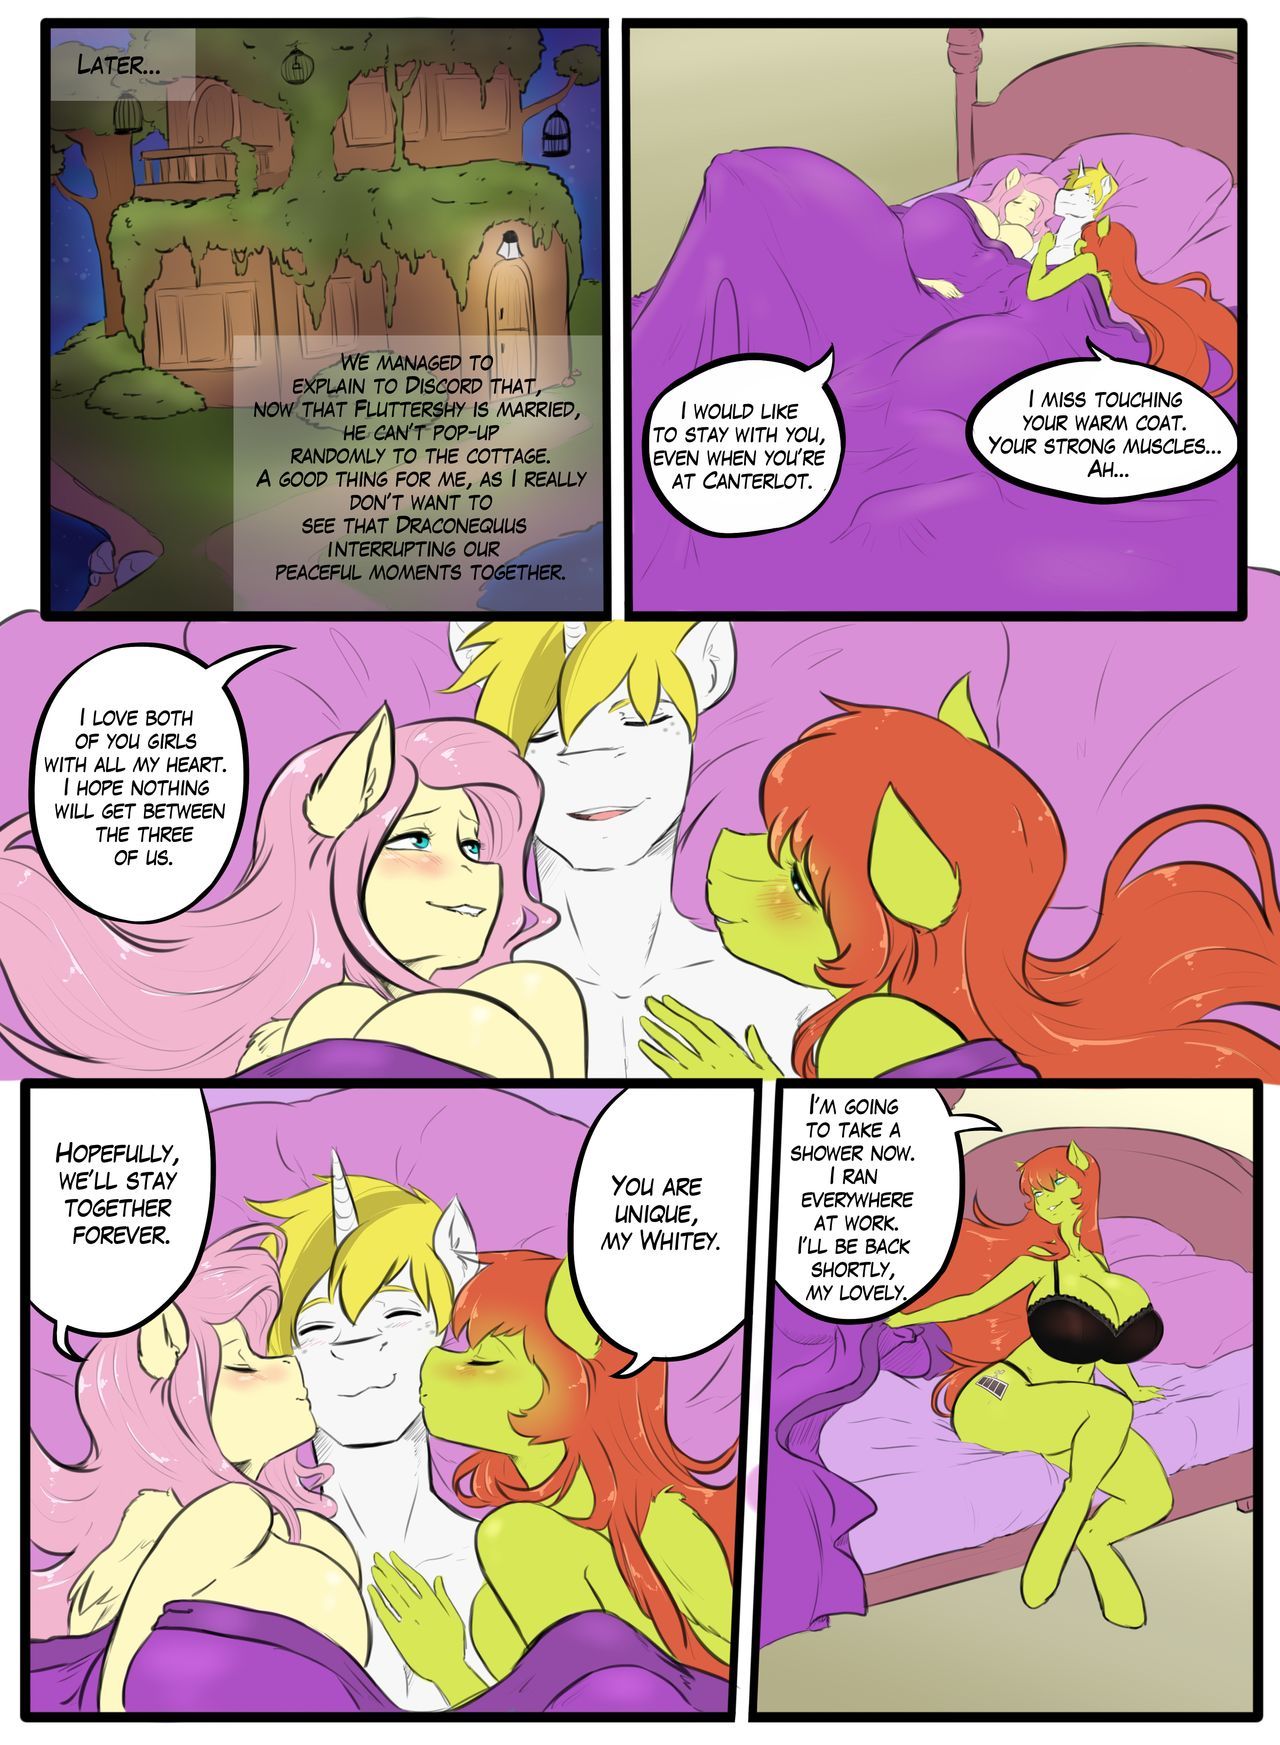 Heart of Gold (My Little Pony Friendship Is Magic) page 5